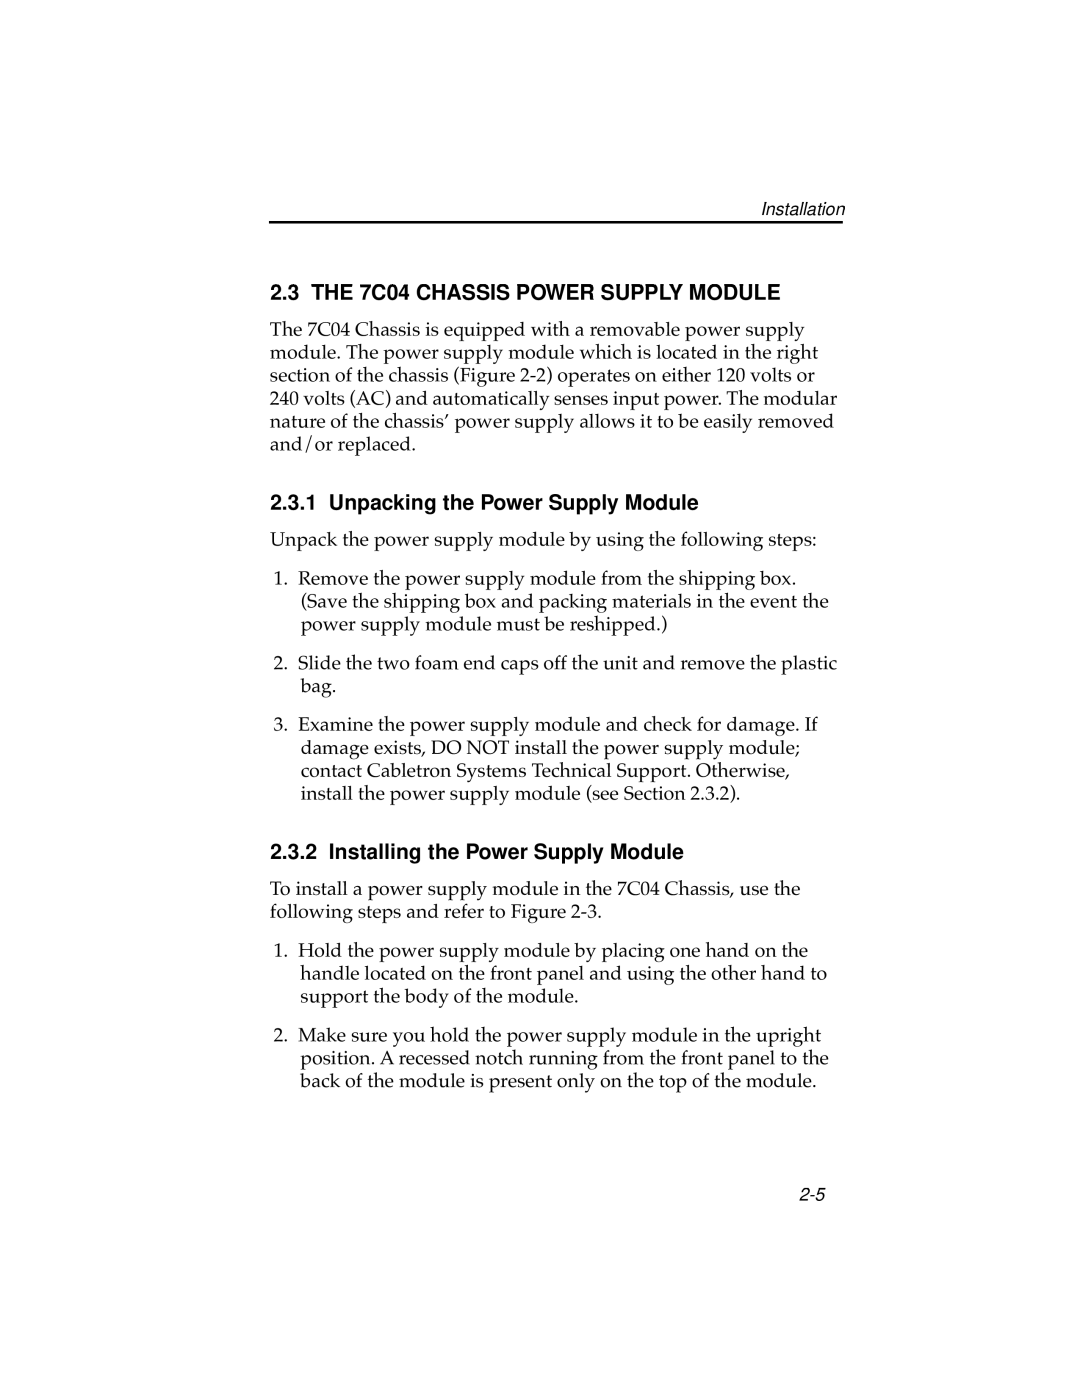 Cabletron Systems 7C04 Workgroup manual THE 7C04 CHASSIS POWER SUPPLY MODULE, Unpacking the Power Supply Module 